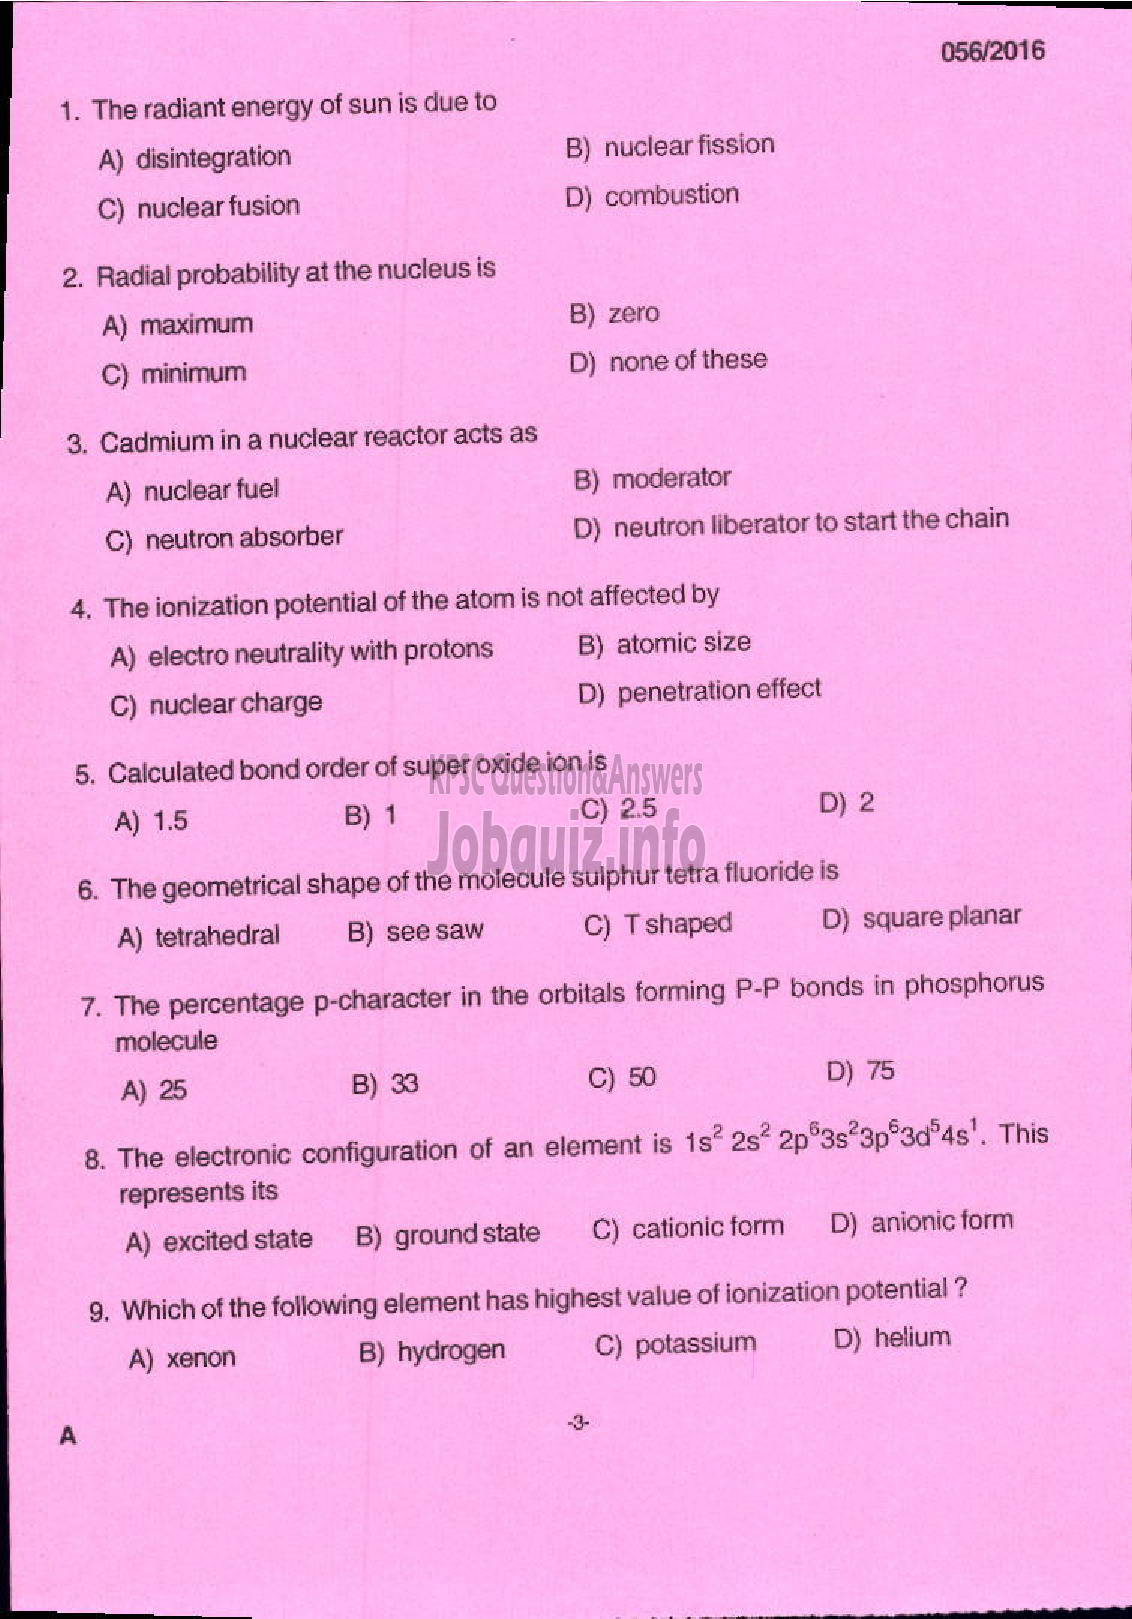 Kerala PSC Question Paper - OTHER RESEARCH ASSISTANT CHEMISTRY FISHERIES-1